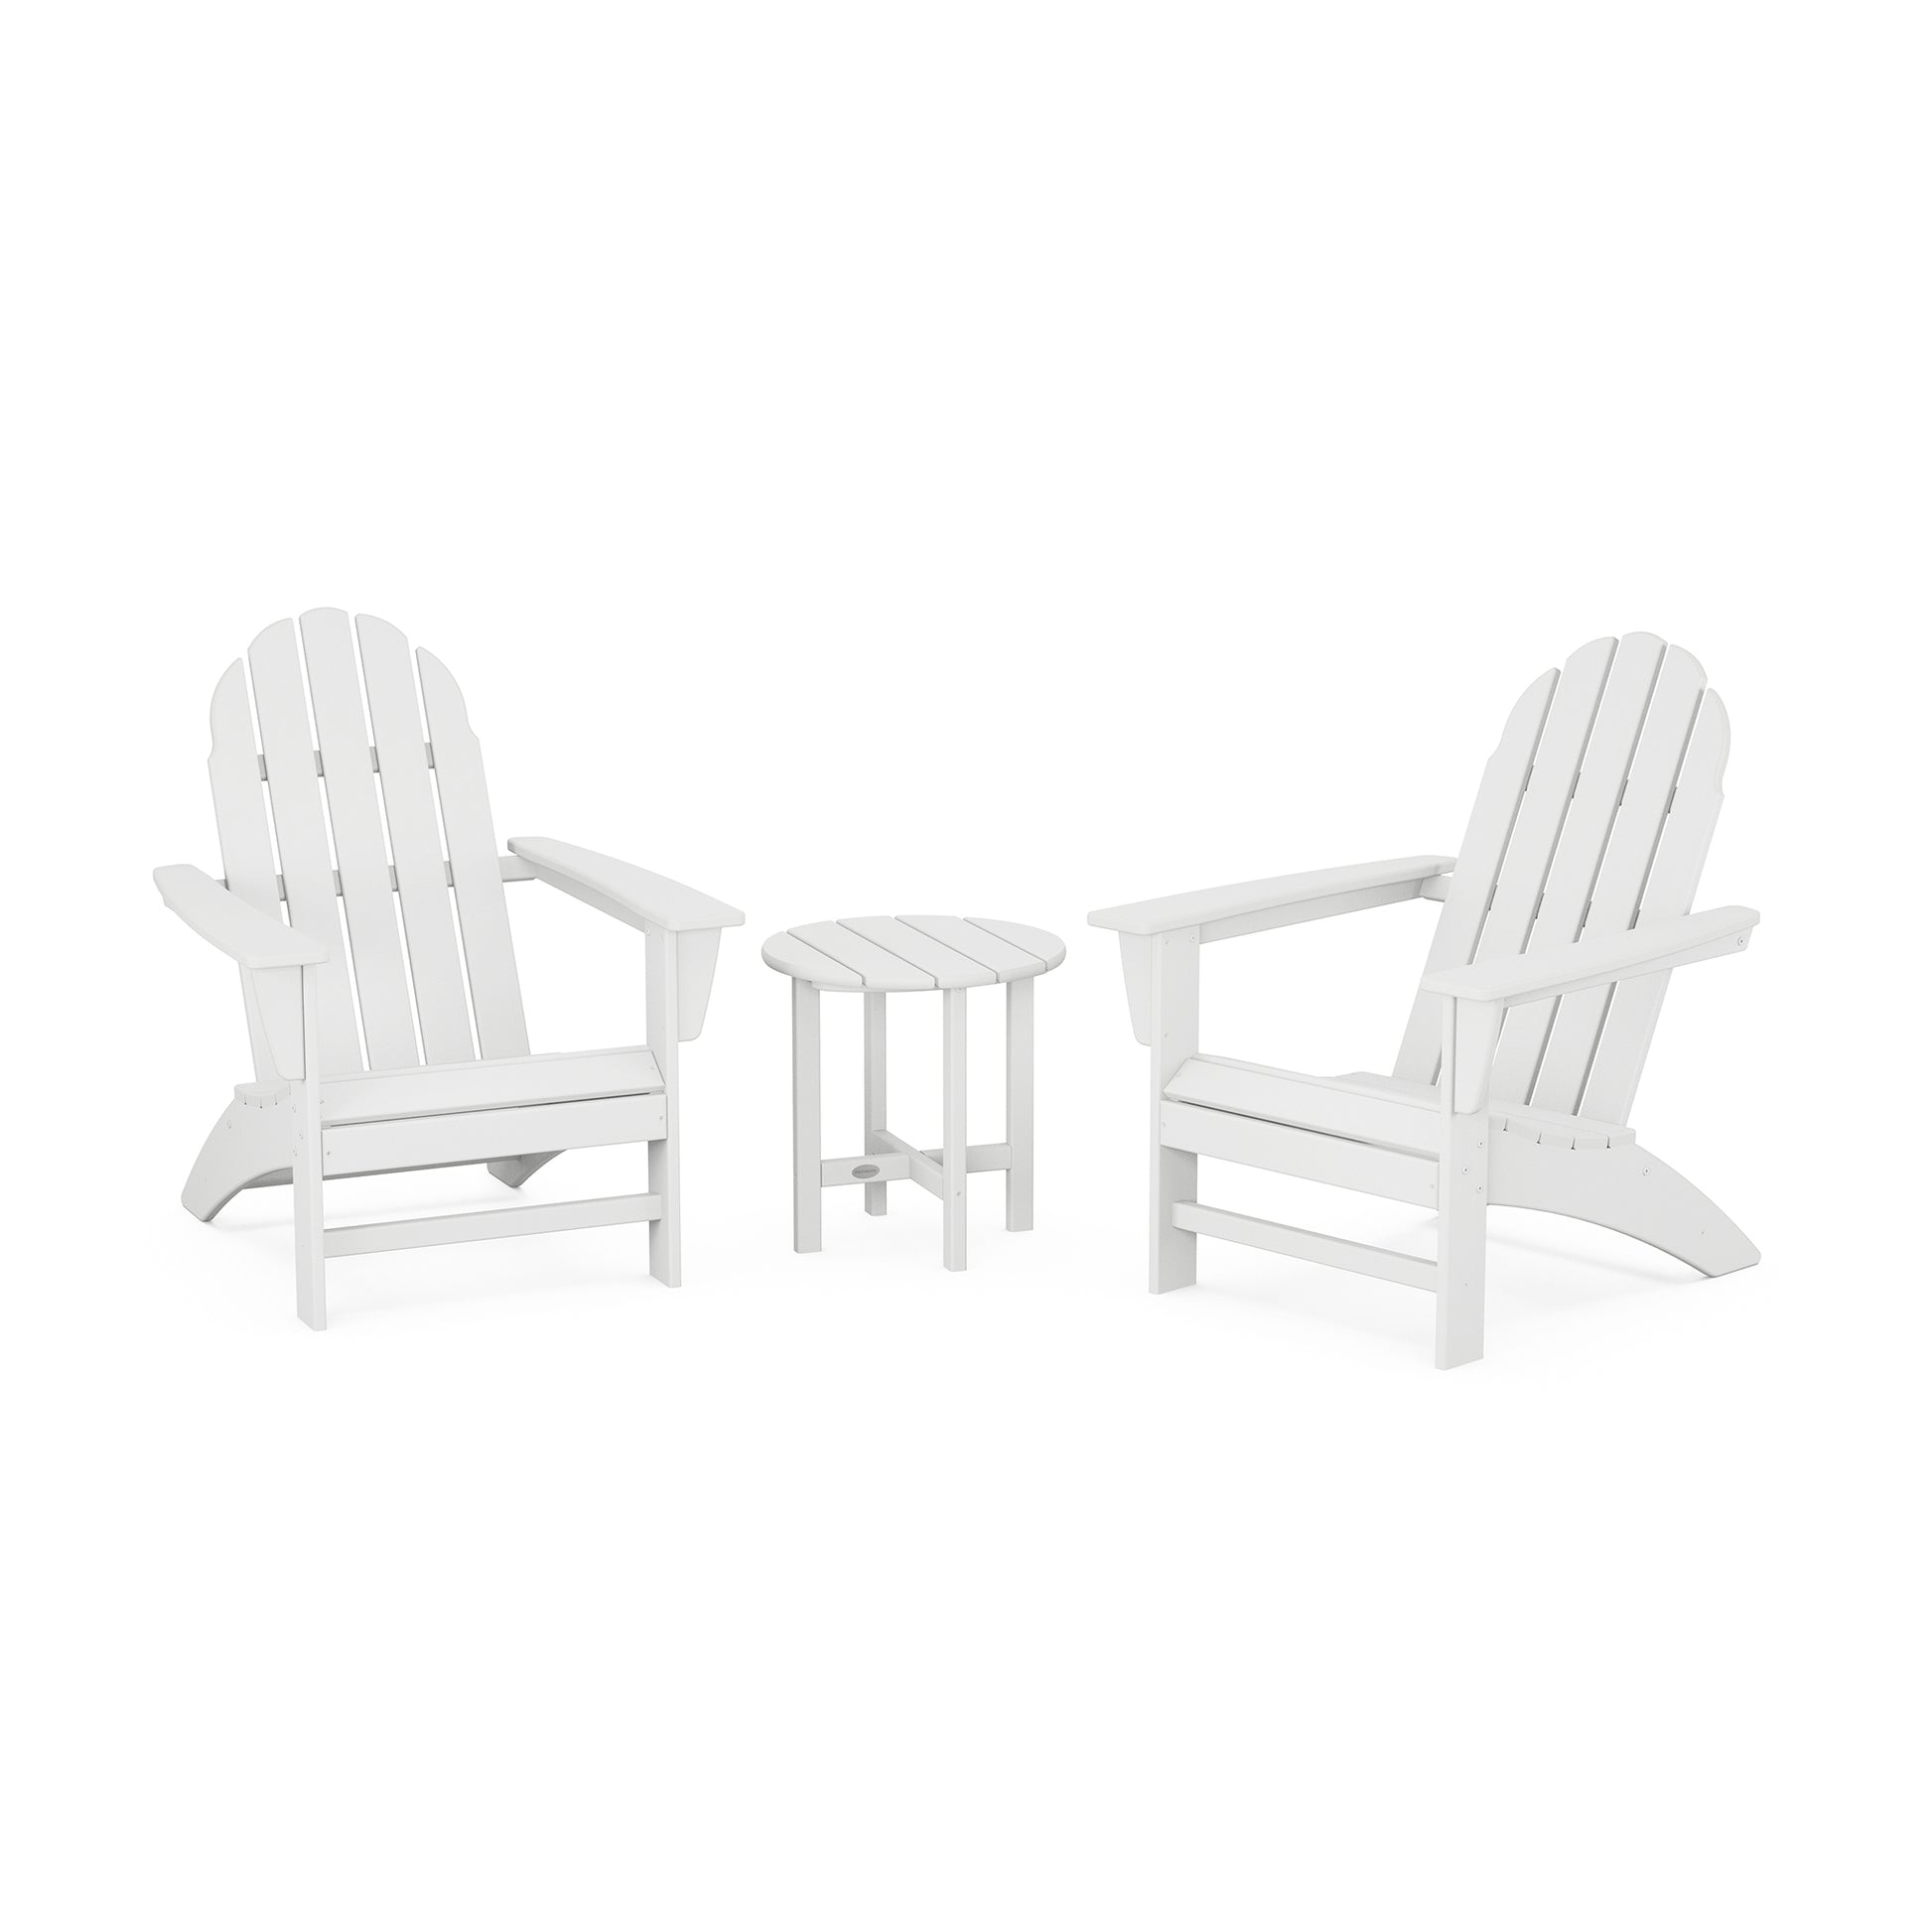 Two white POLYWOOD Vineyard Adirondack chairs with a matching small round table between them, arranged on a plain white background, creating an elegant 3-piece patio set.